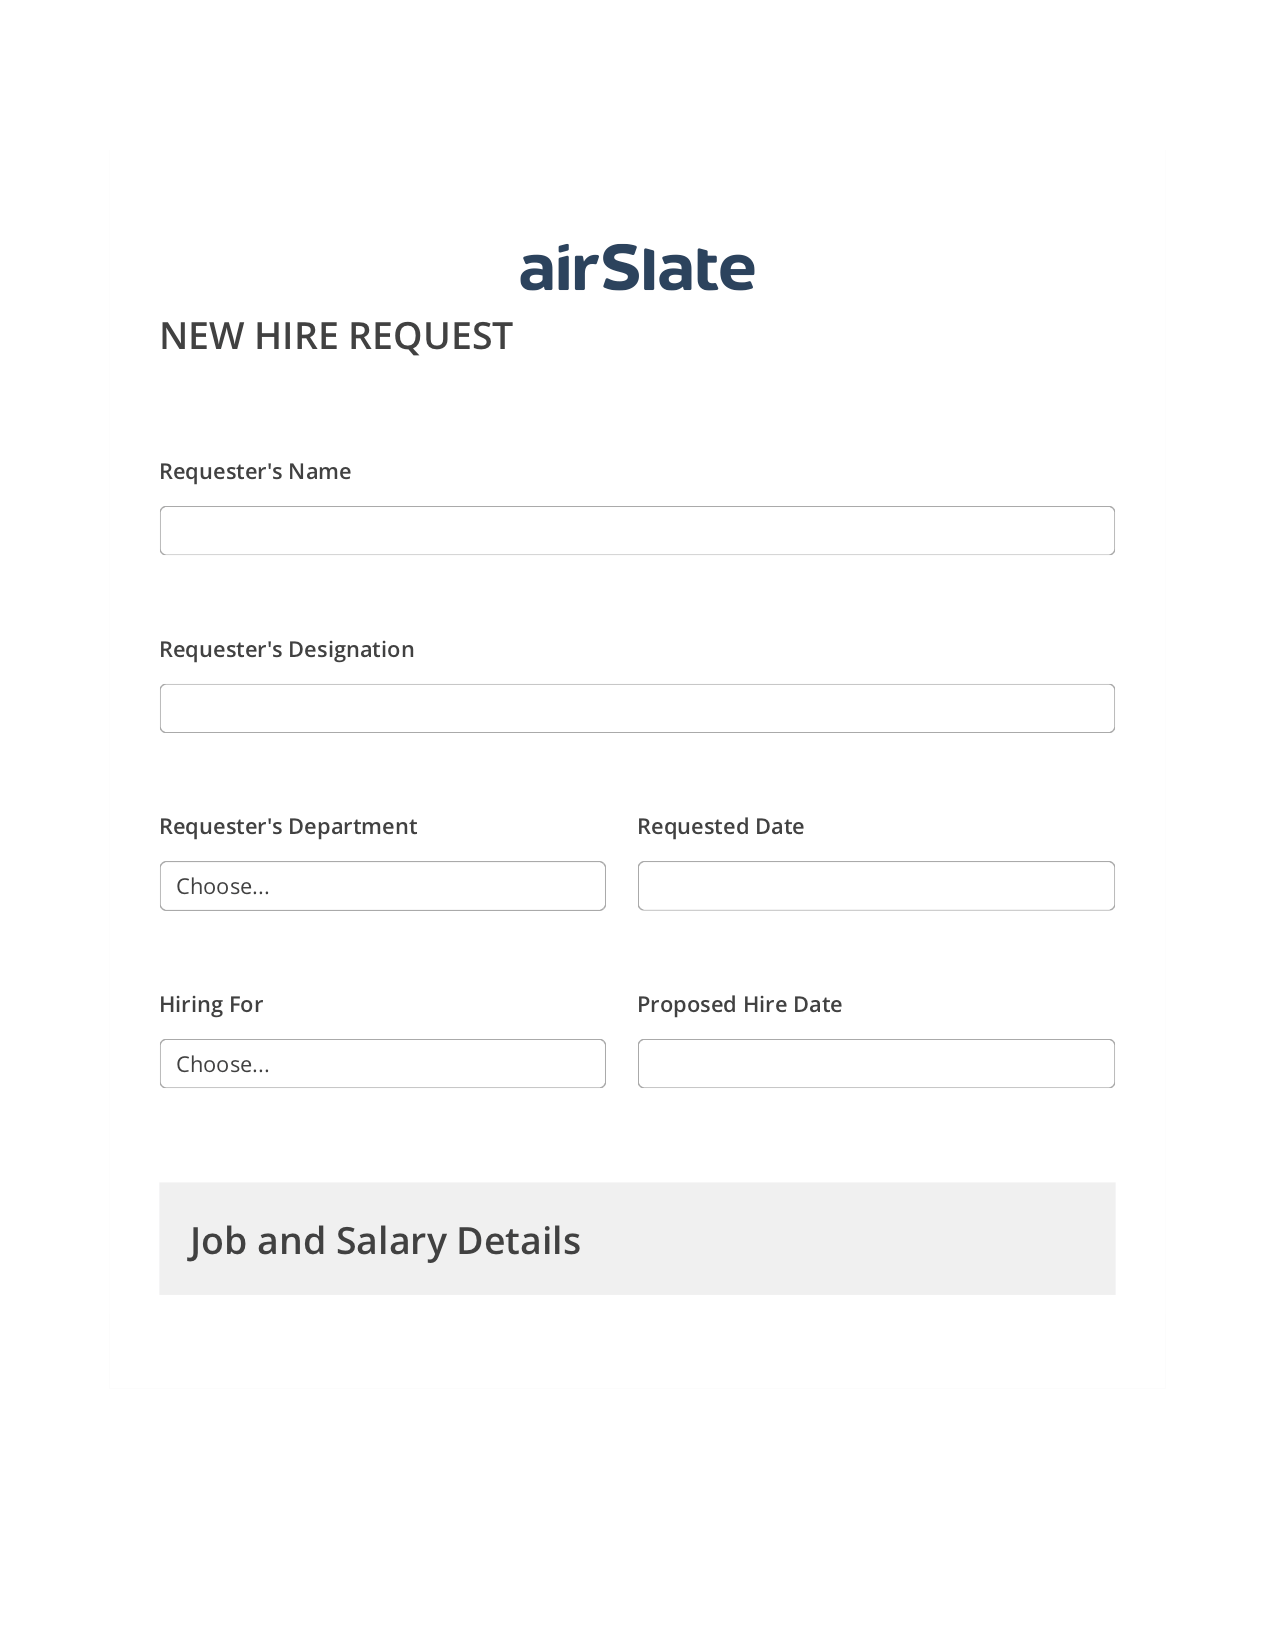 Hiring Request Workflow Pre-fill Dropdowns from Excel Bot, SendGrid send Campaign bot, Archive to OneDrive Bot